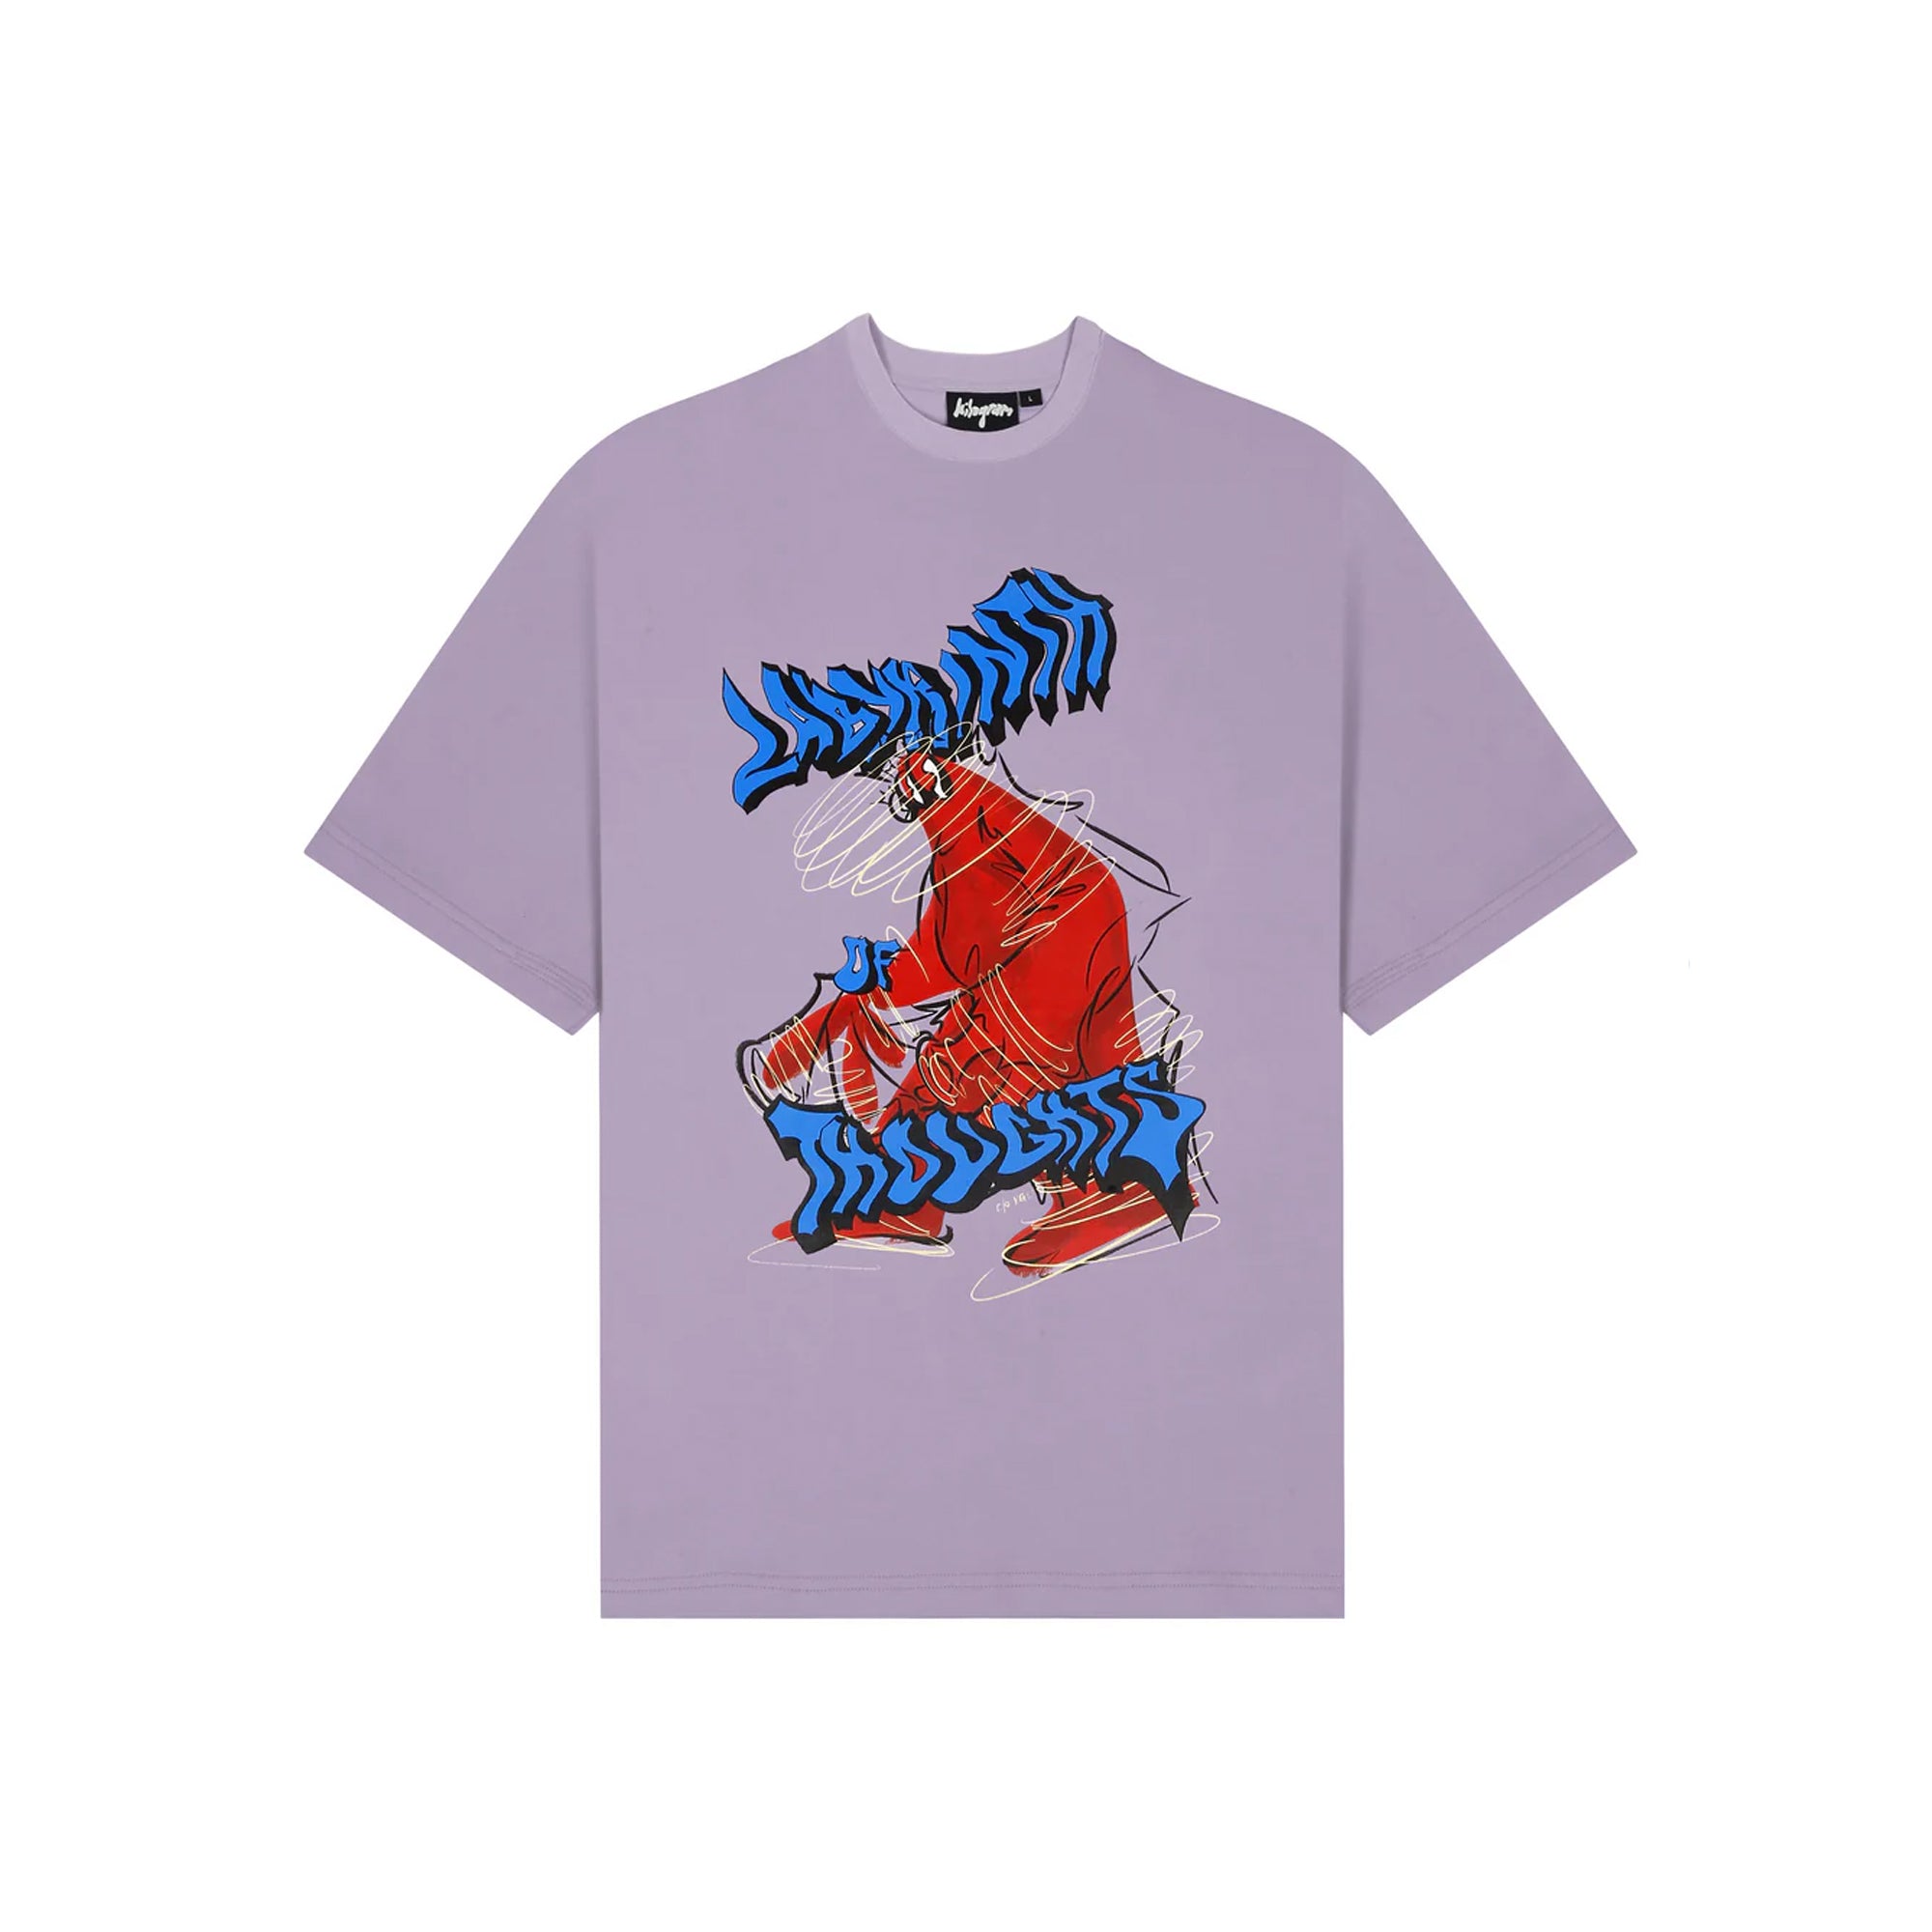 'LABYRINTH OF THOUGHTS' TEE